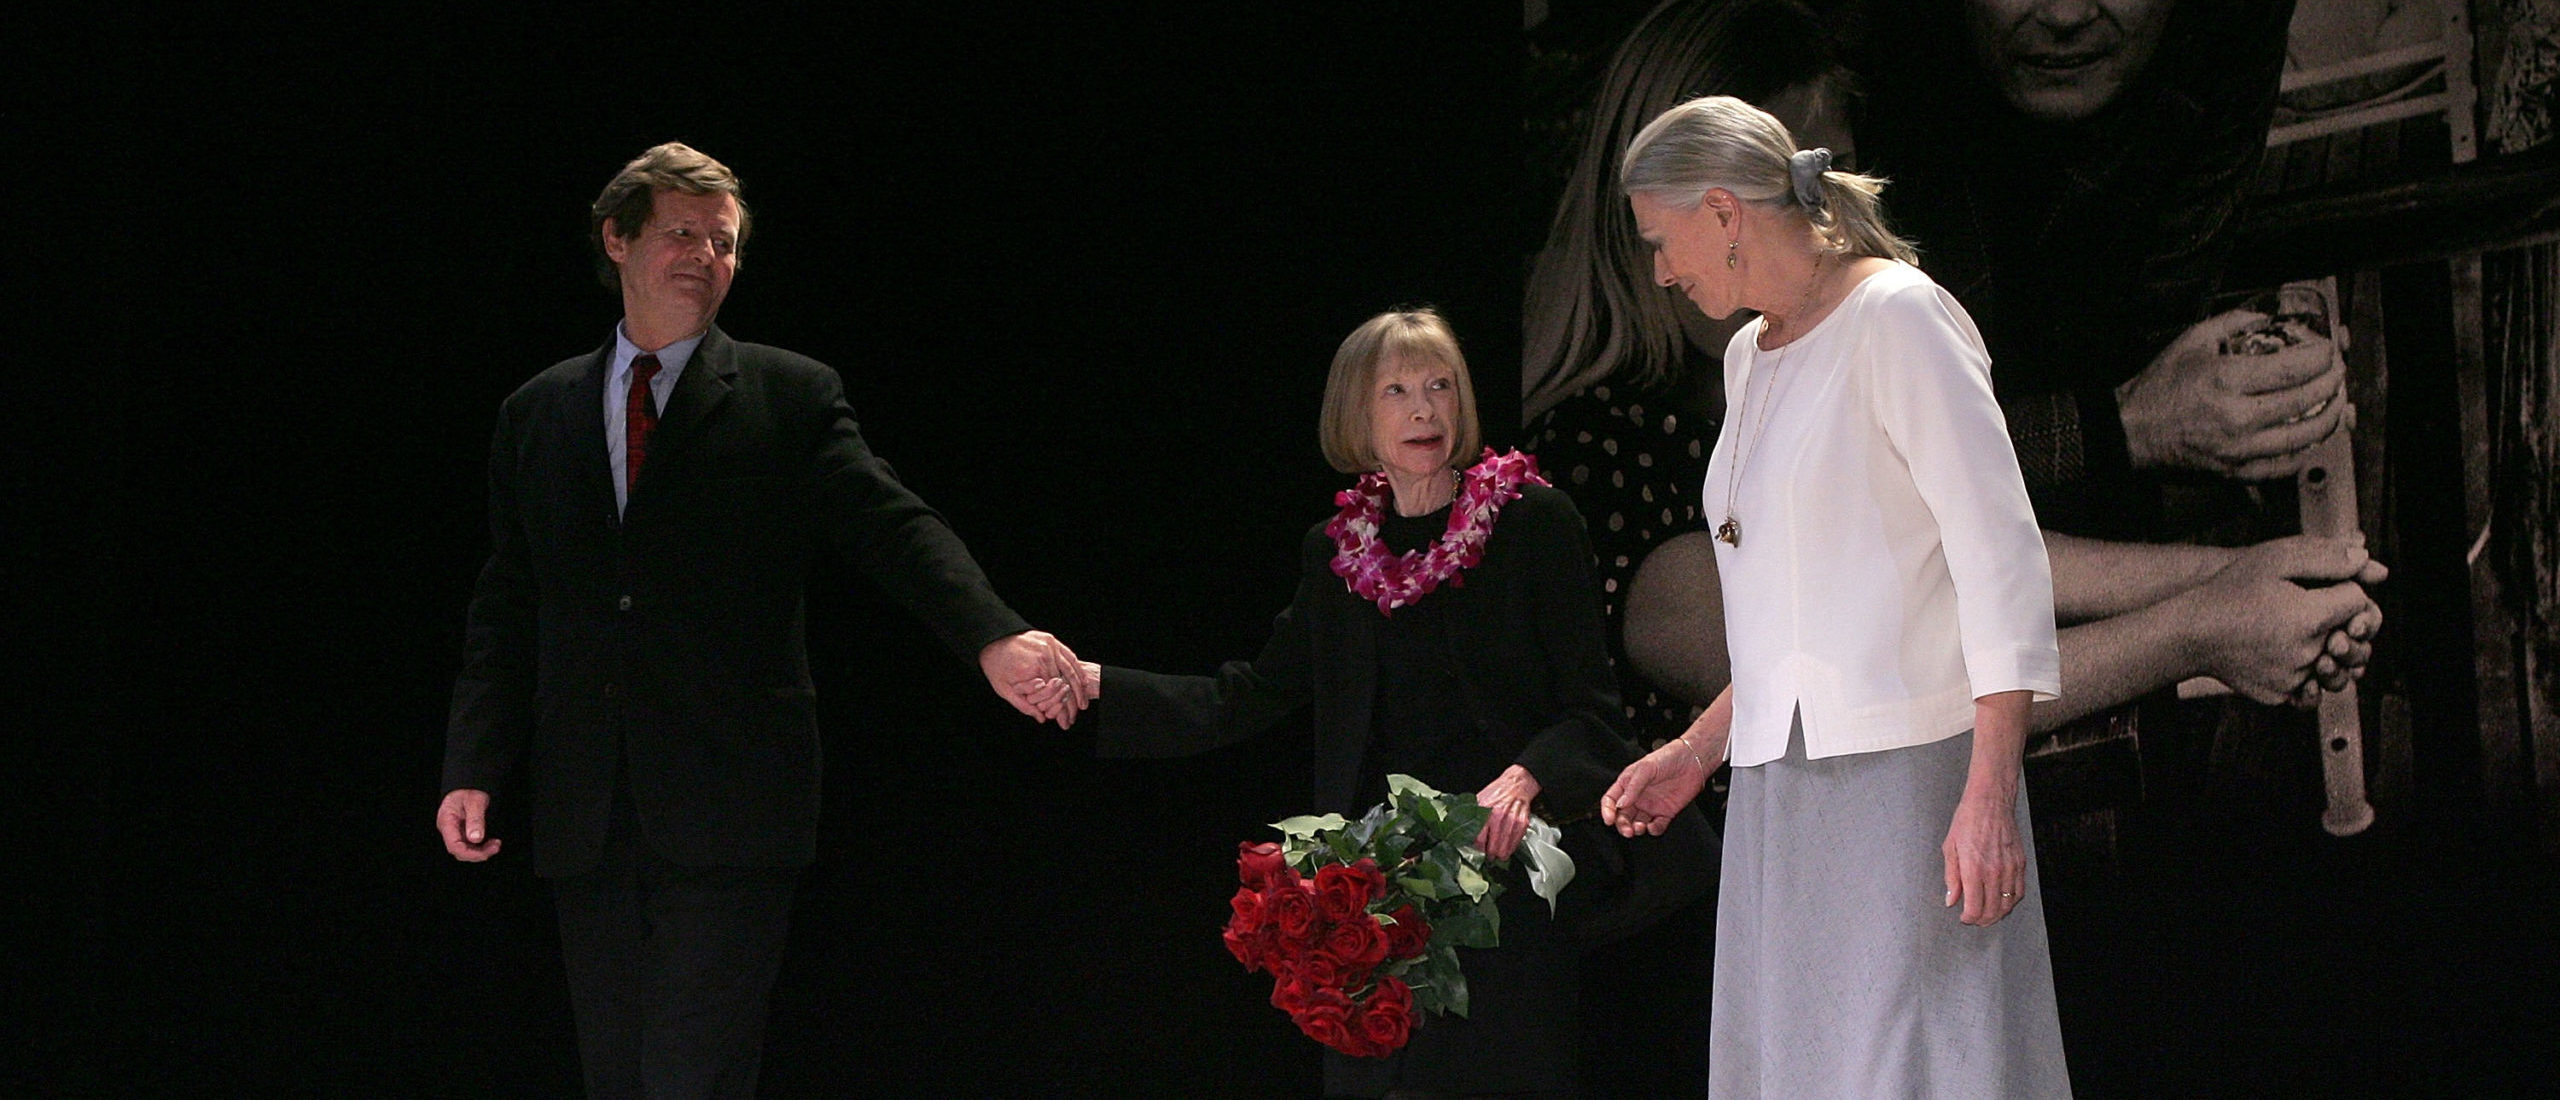 NEW YORK - MARCH 29: Director David Hare, writer Joan Didion and actress Vanessa Redgrave take stage during curtain call for the opening night of "The Year Of Magical Thinking" at Booth theater on March 29, 2007 in New York City. (Photo by Bryan Bedder/Getty Images)